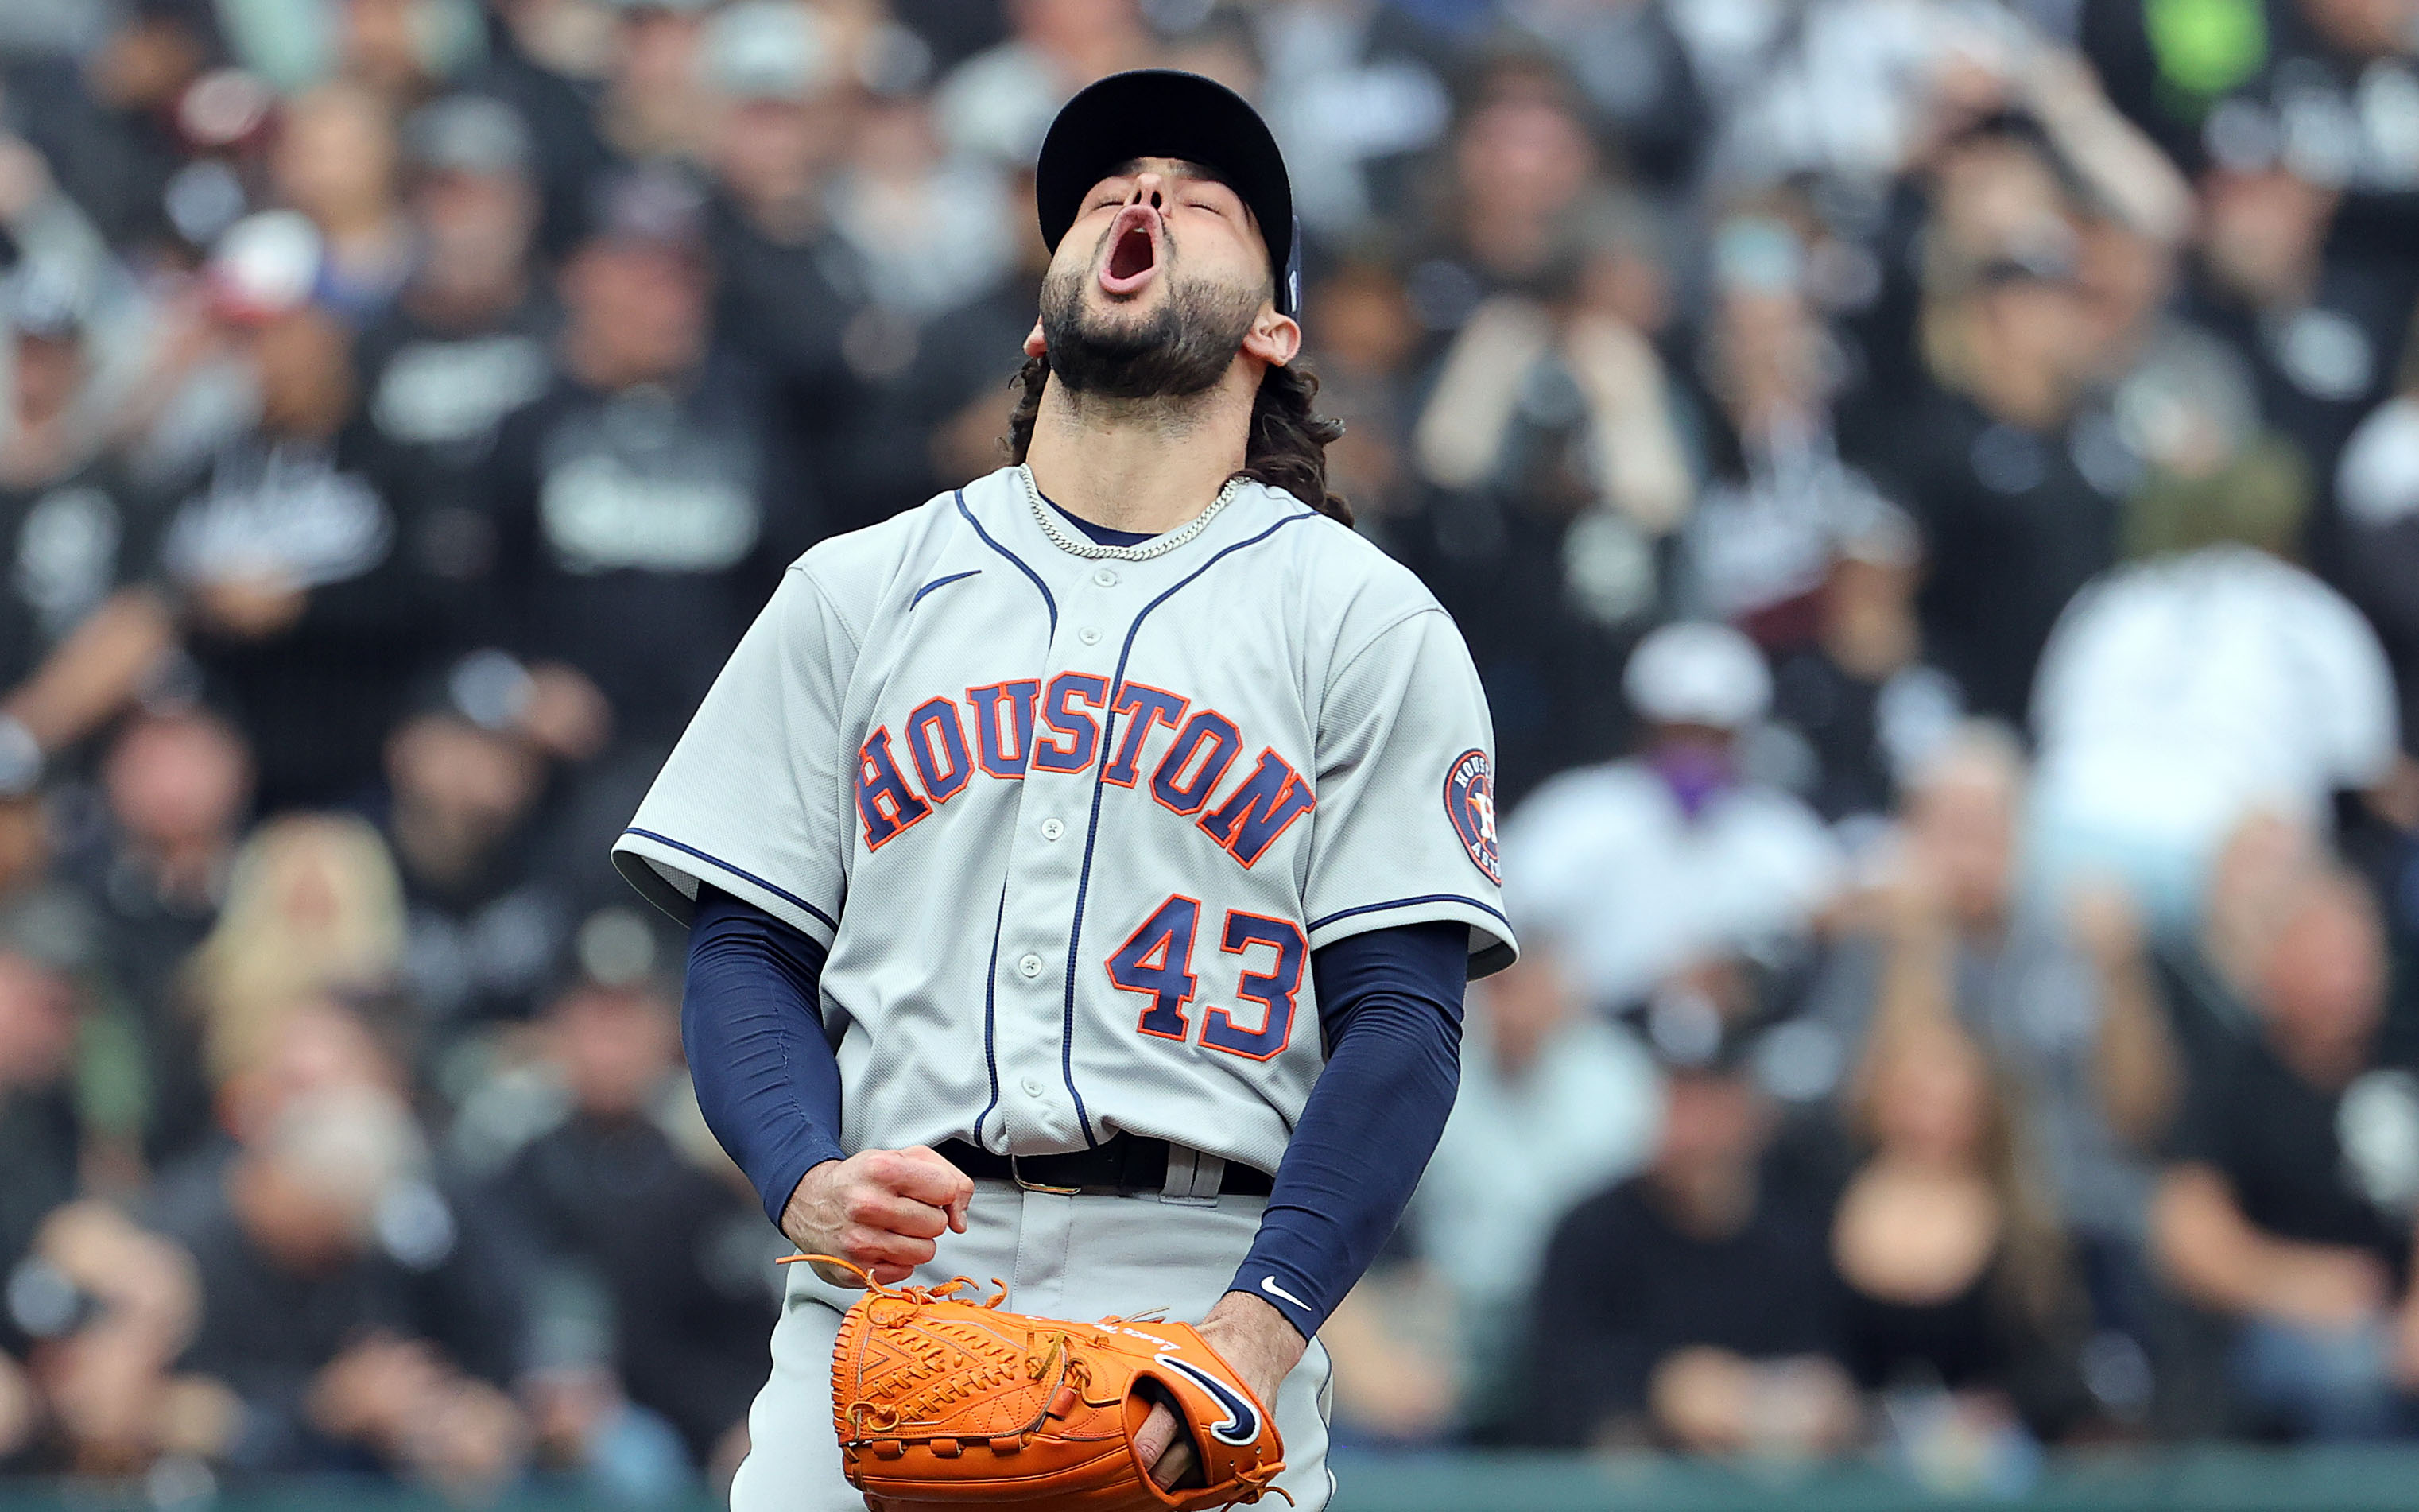 Houston Astros ace Lance McCullers Jr. put the Chicago White Sox